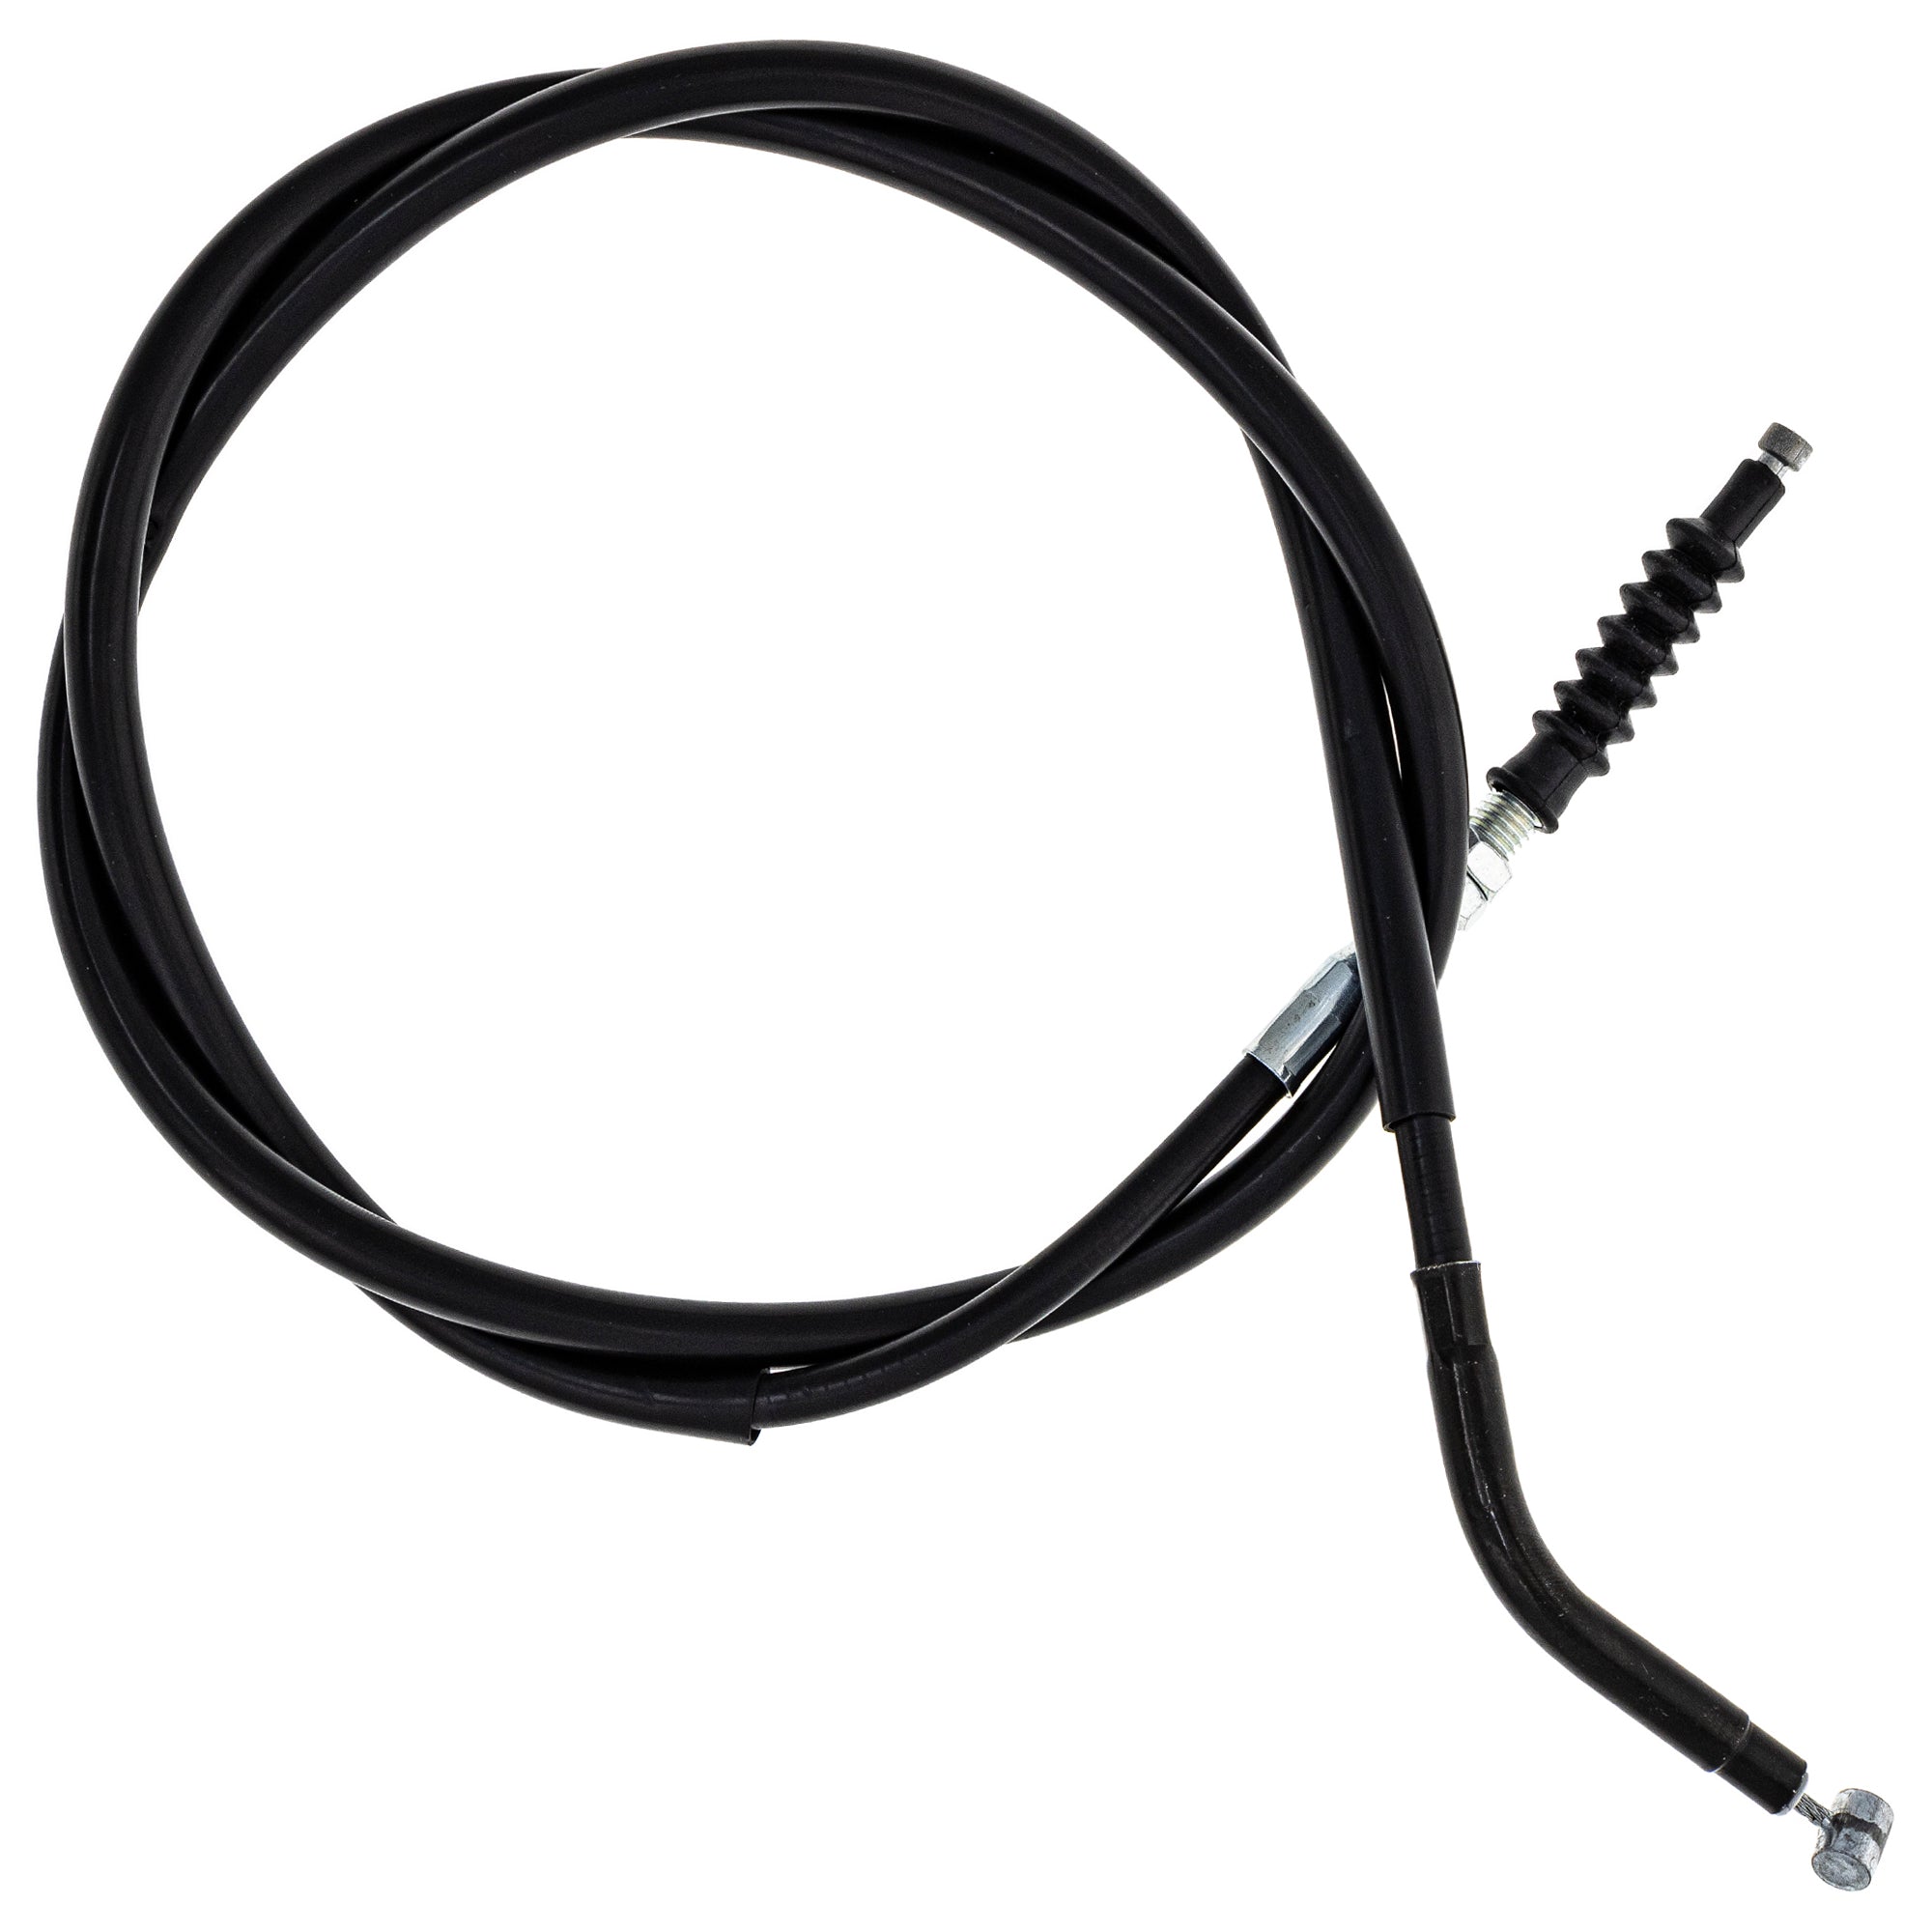 Clutch Cable for zOTHER Ninja GPz550 NICHE 519-CCB2594L